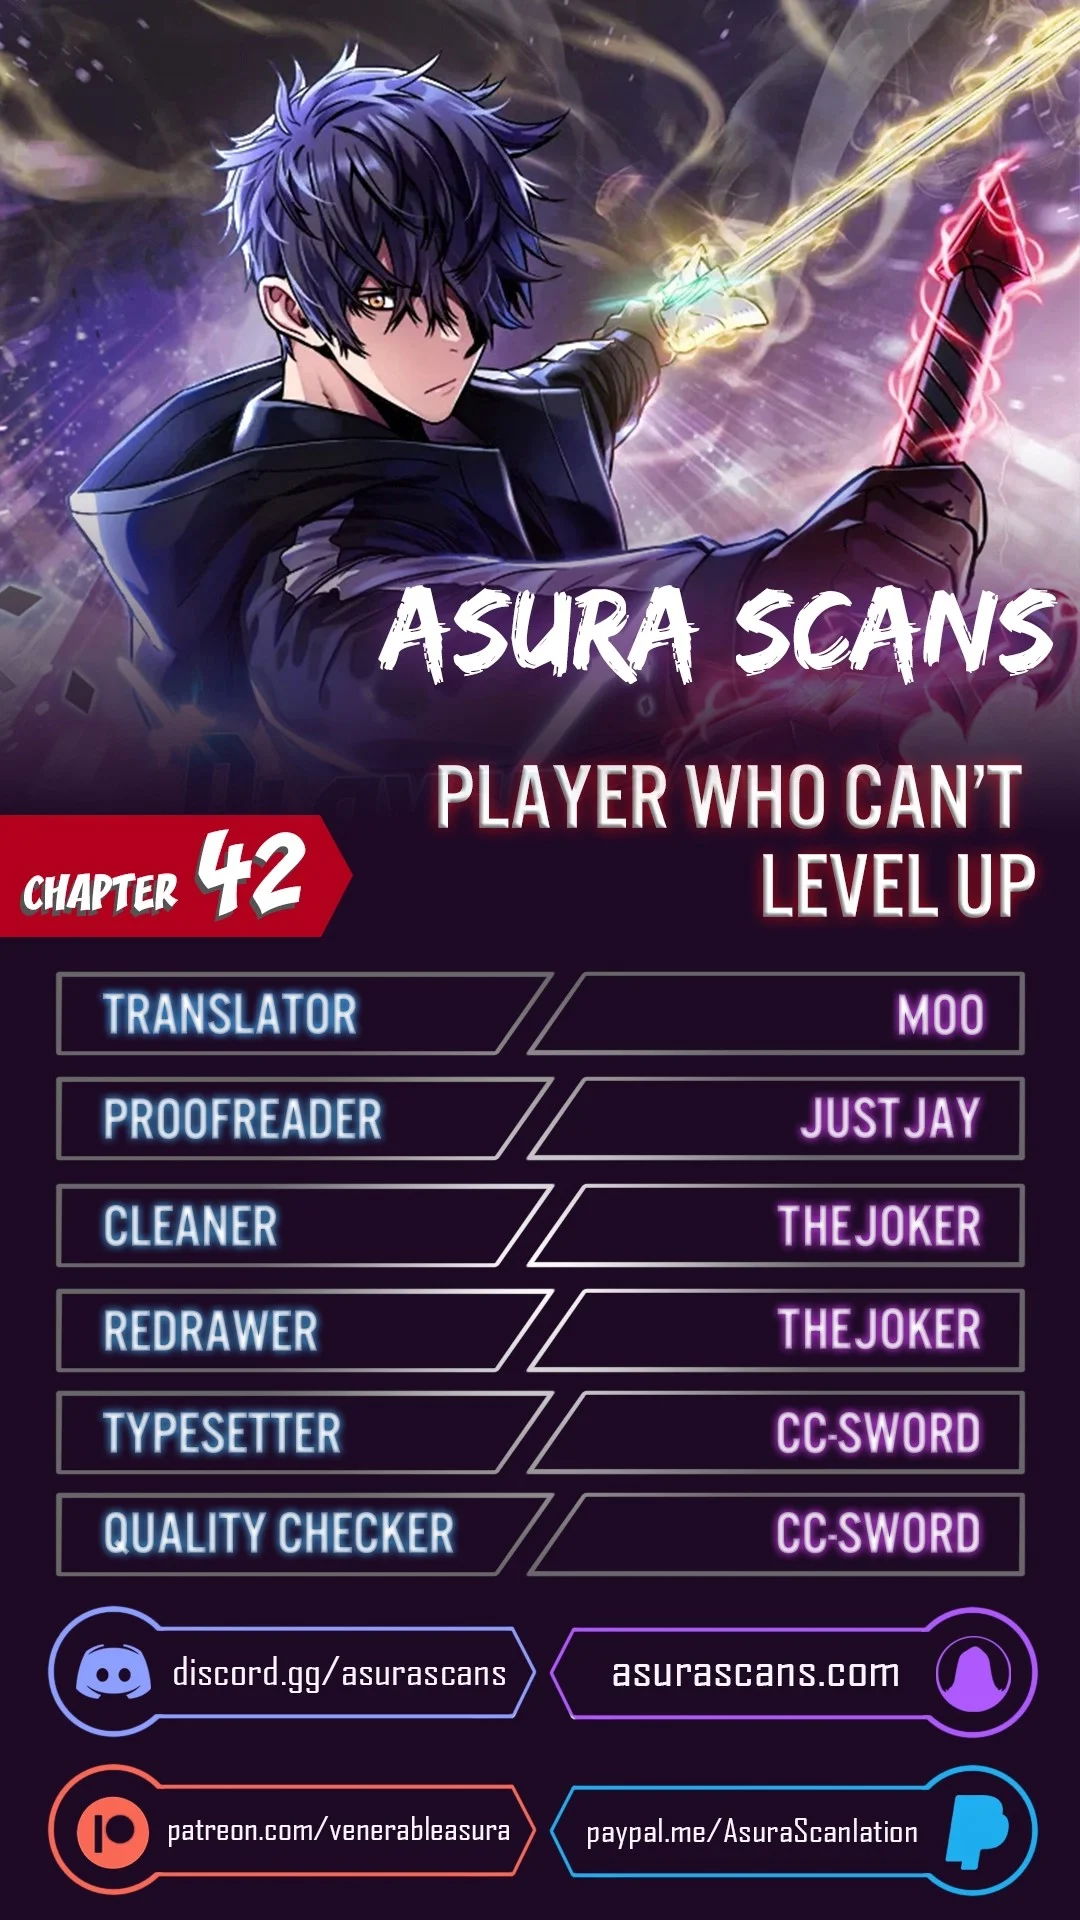 player-who-cant-level-up-chap-42-0